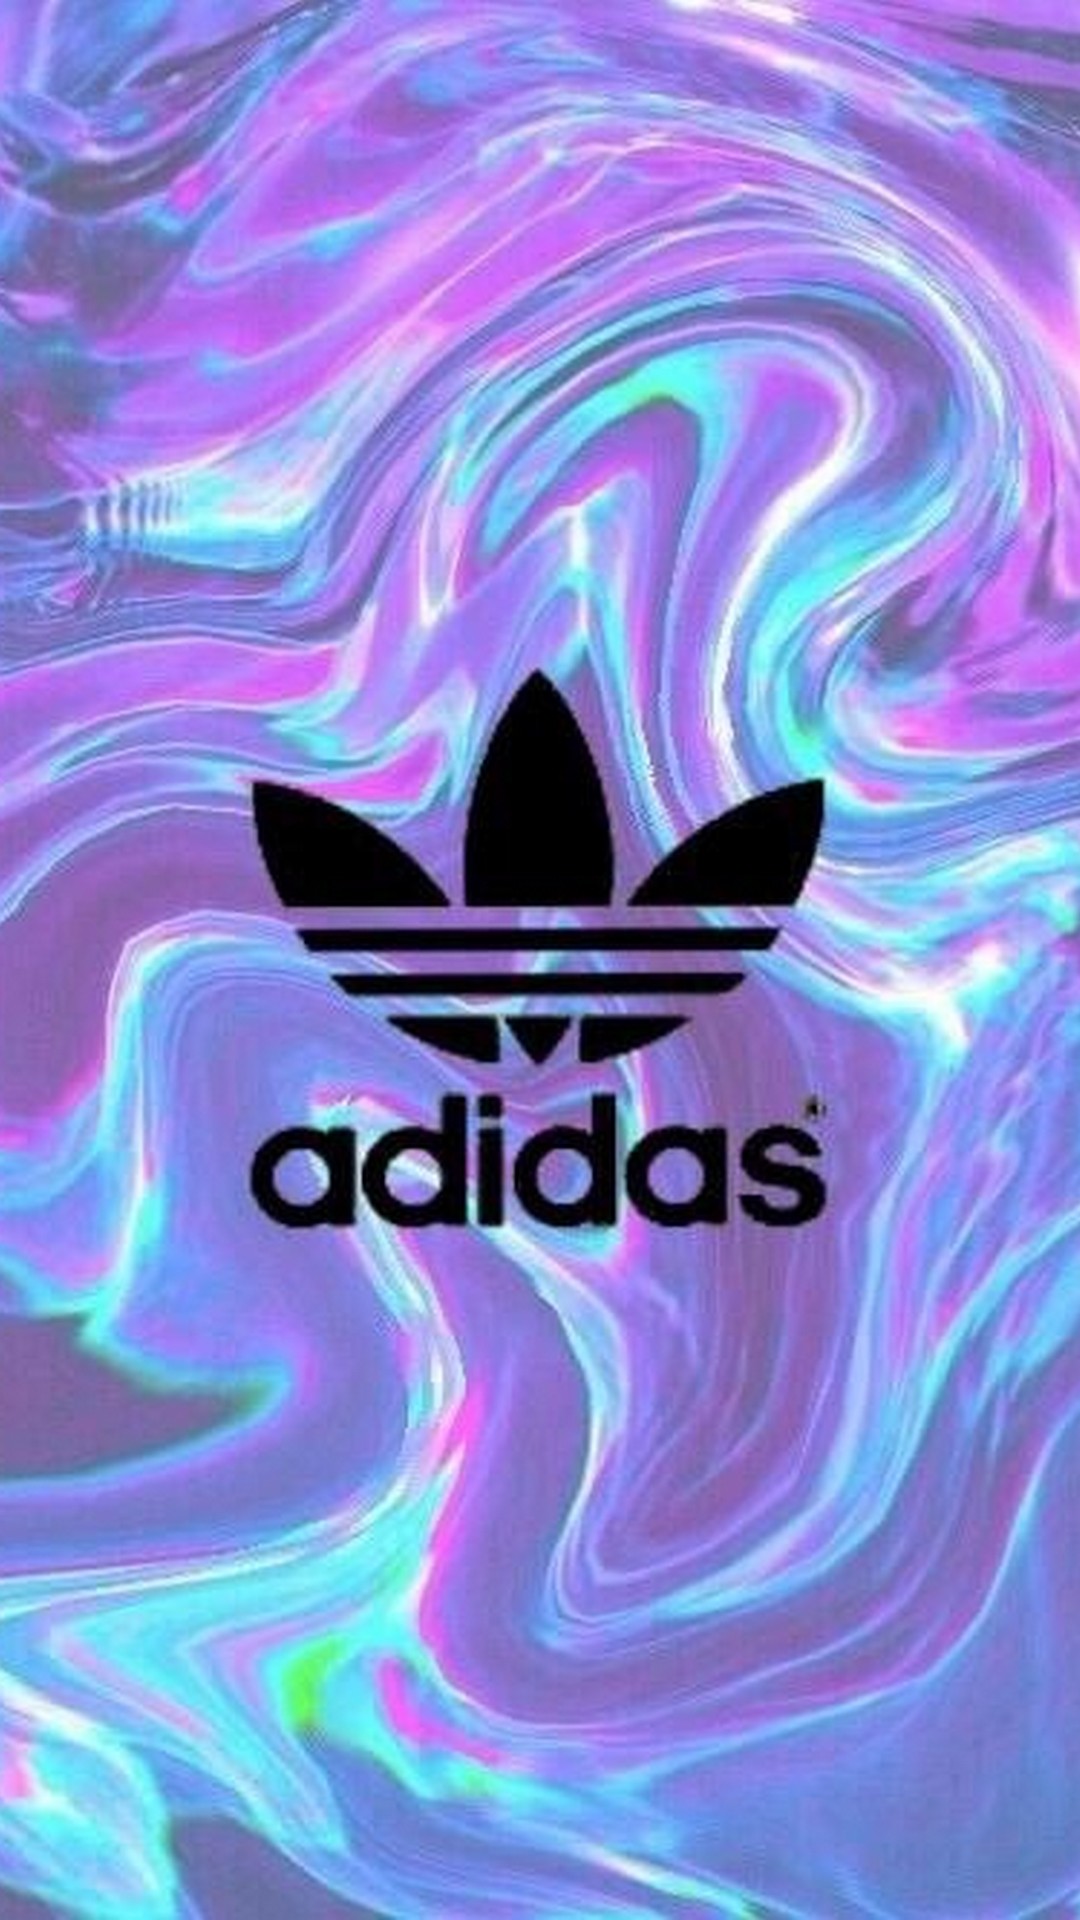 Iphone Adidas Backgrounds - HD Wallpaper 